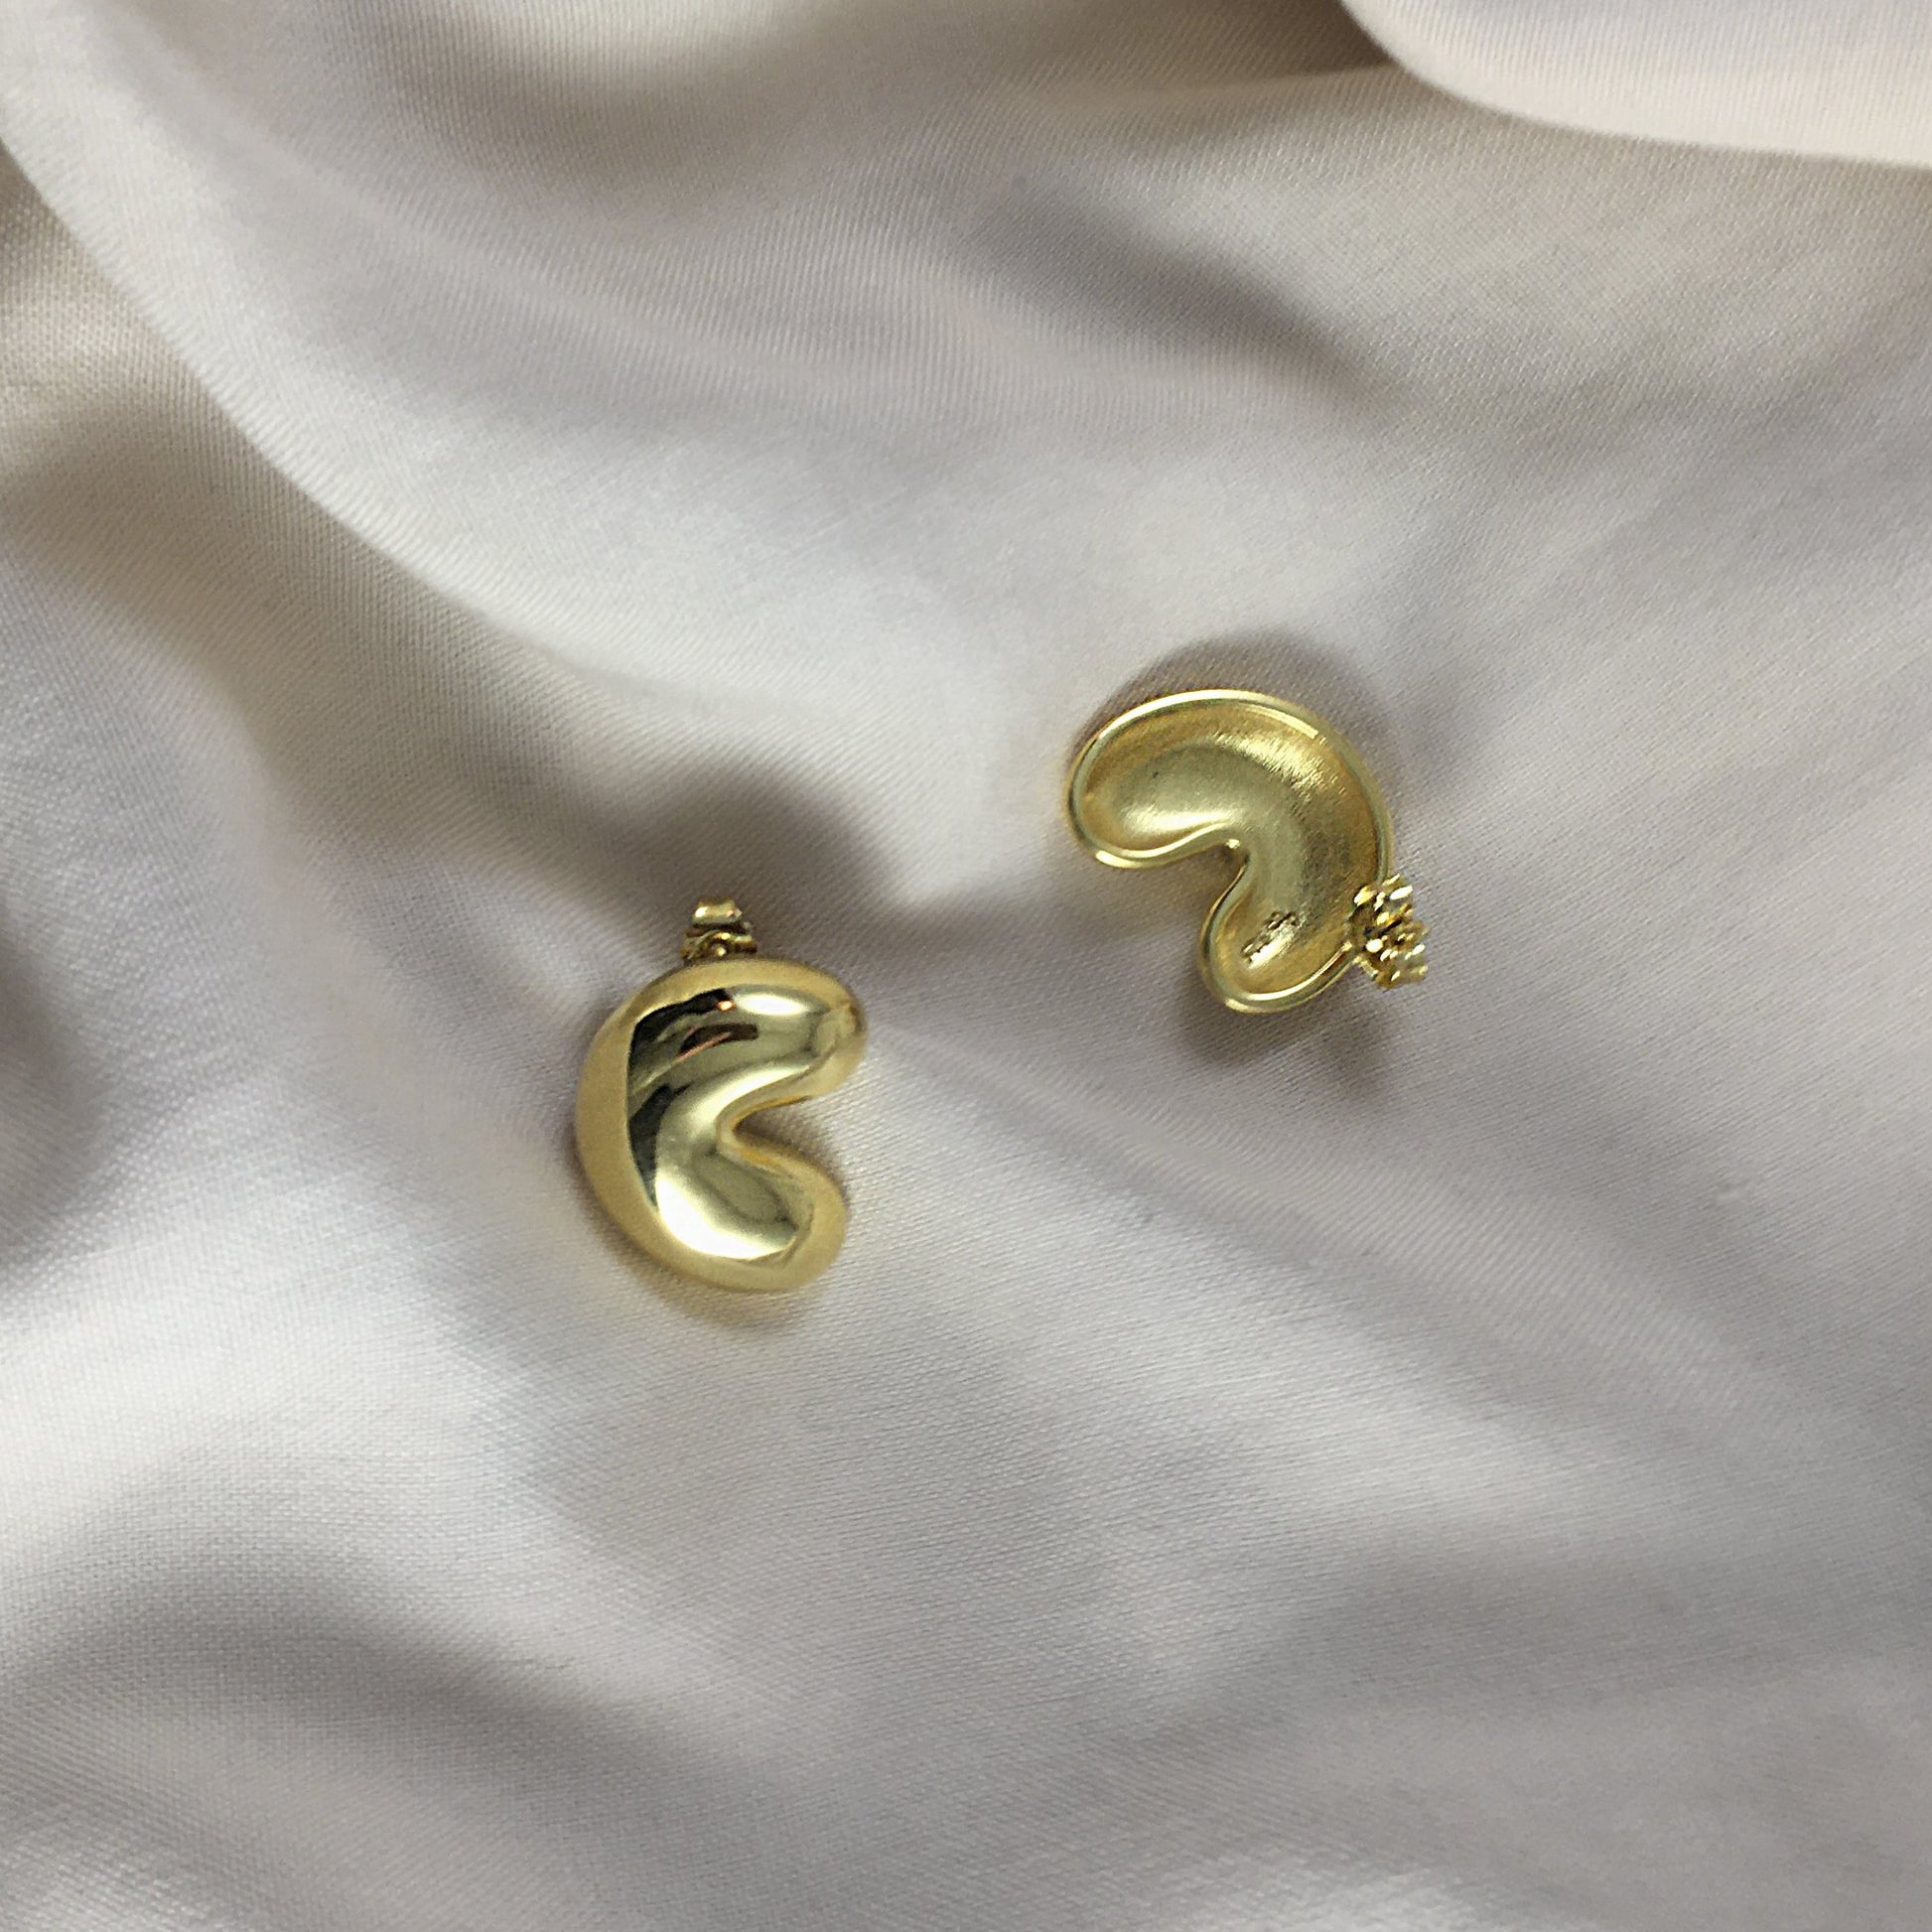 A pair of gold earrings laying on a light textile